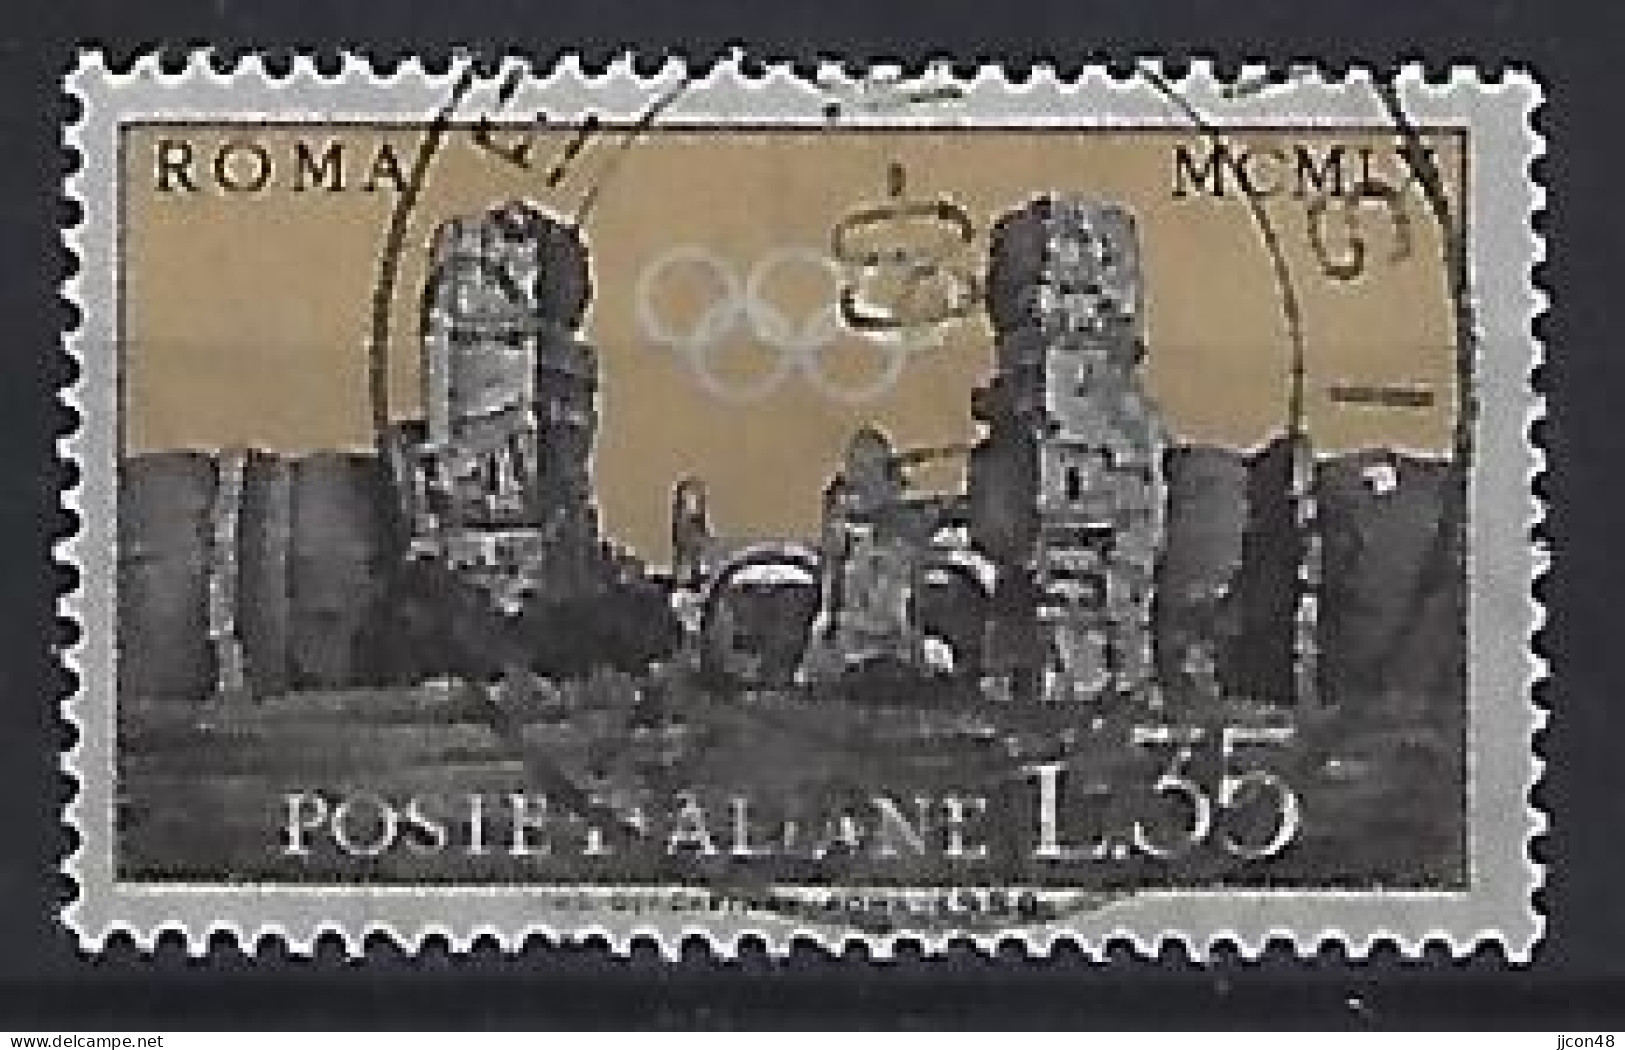 Italy 1959  Olympische Sommerspiele 1960 Rom  (o) Mi.1041 - 1946-60: Used